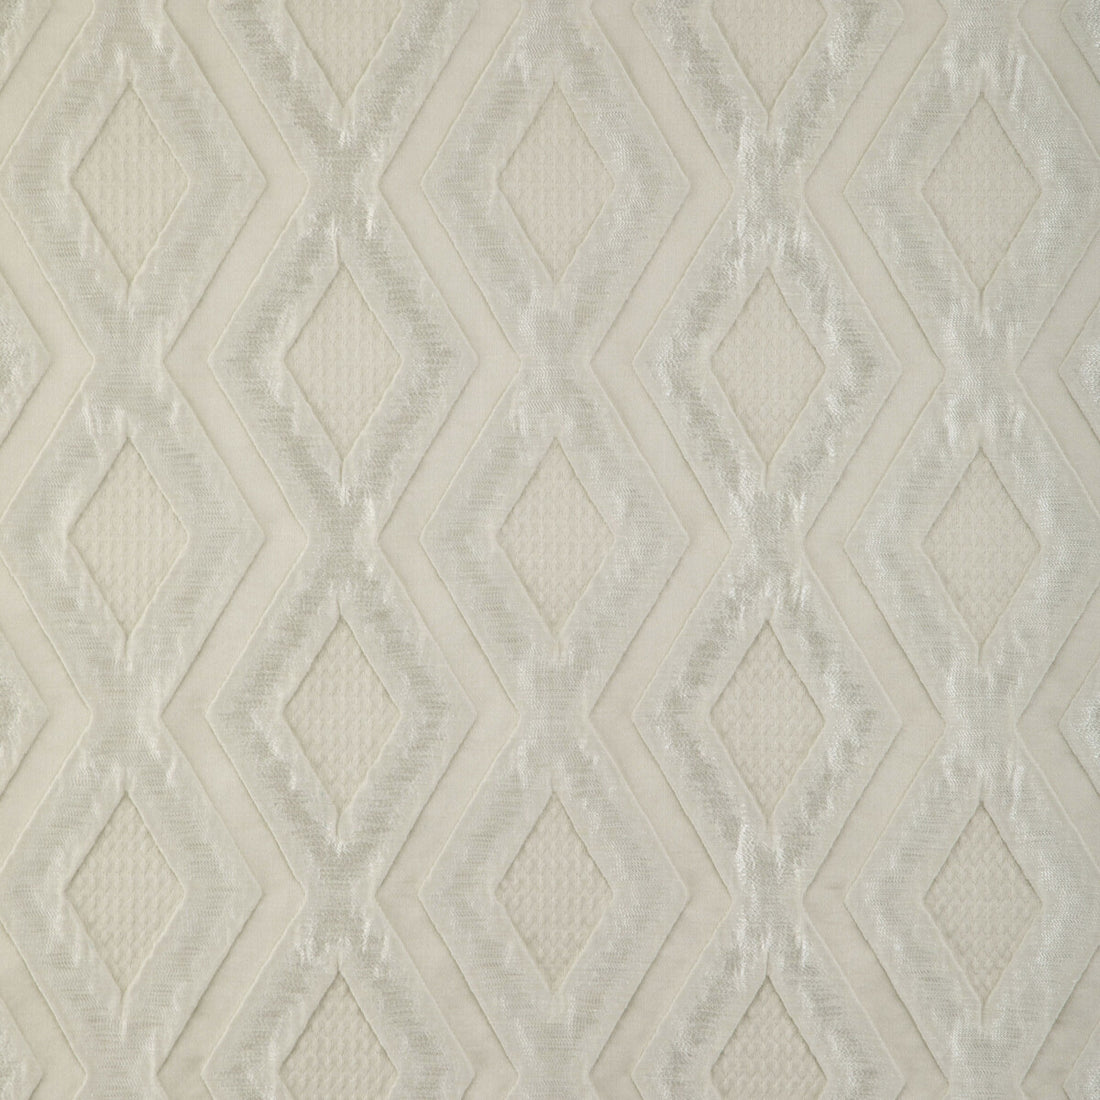 Flawless fabric in cloud color - pattern 36839.106.0 - by Kravet Design in the Candice Olson collection